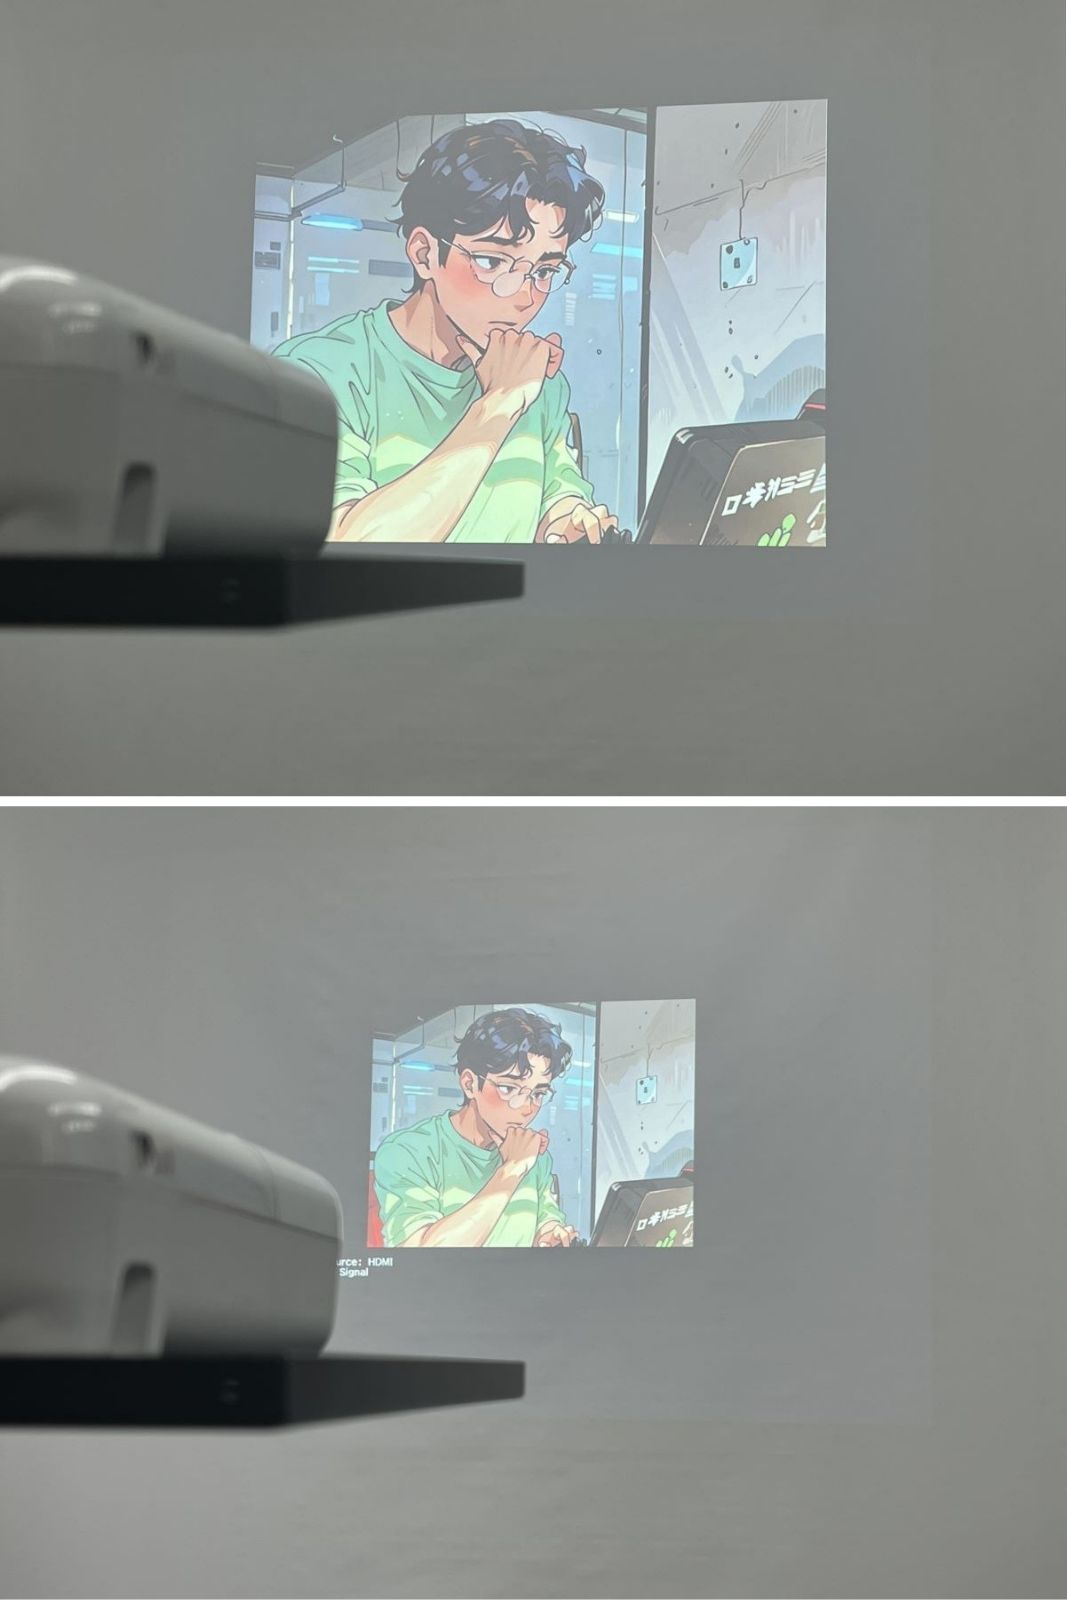 zoom feature on an epson projector